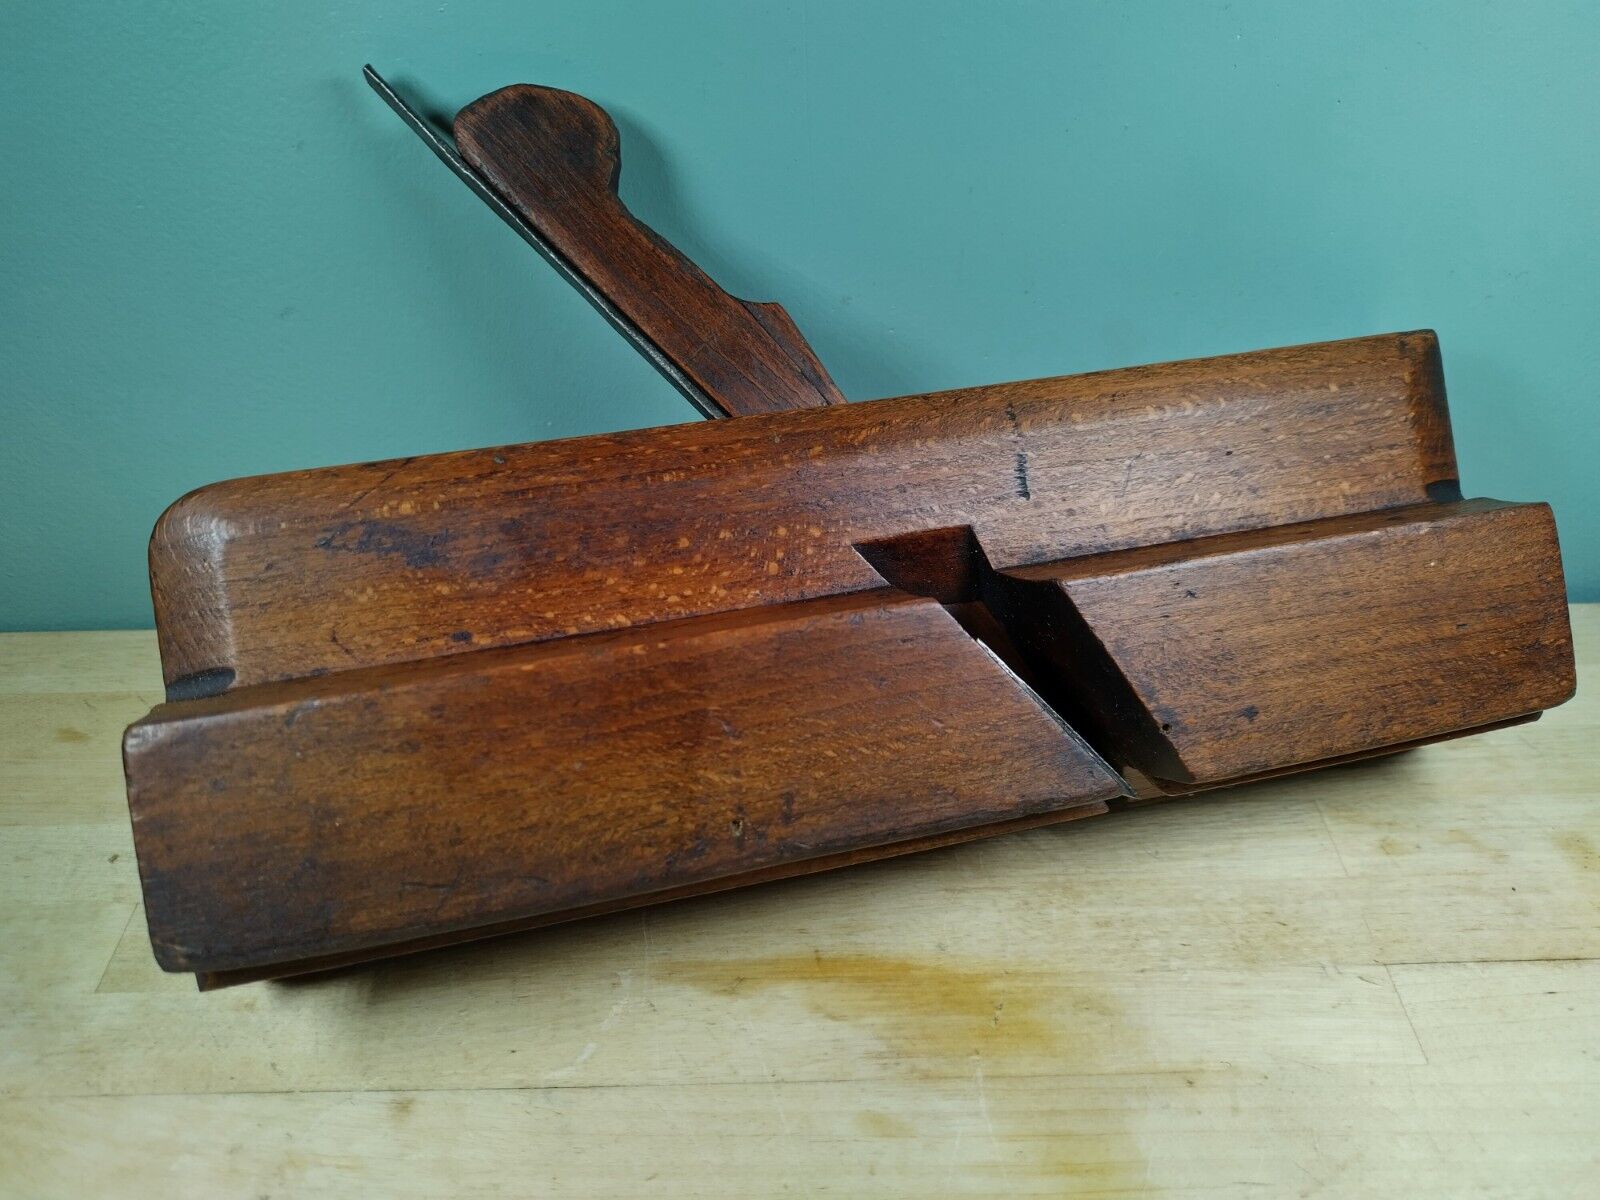 Atkinson. Baltimore, MD. 1829. Step Quirk Ogee Plane. 6/8 mark.